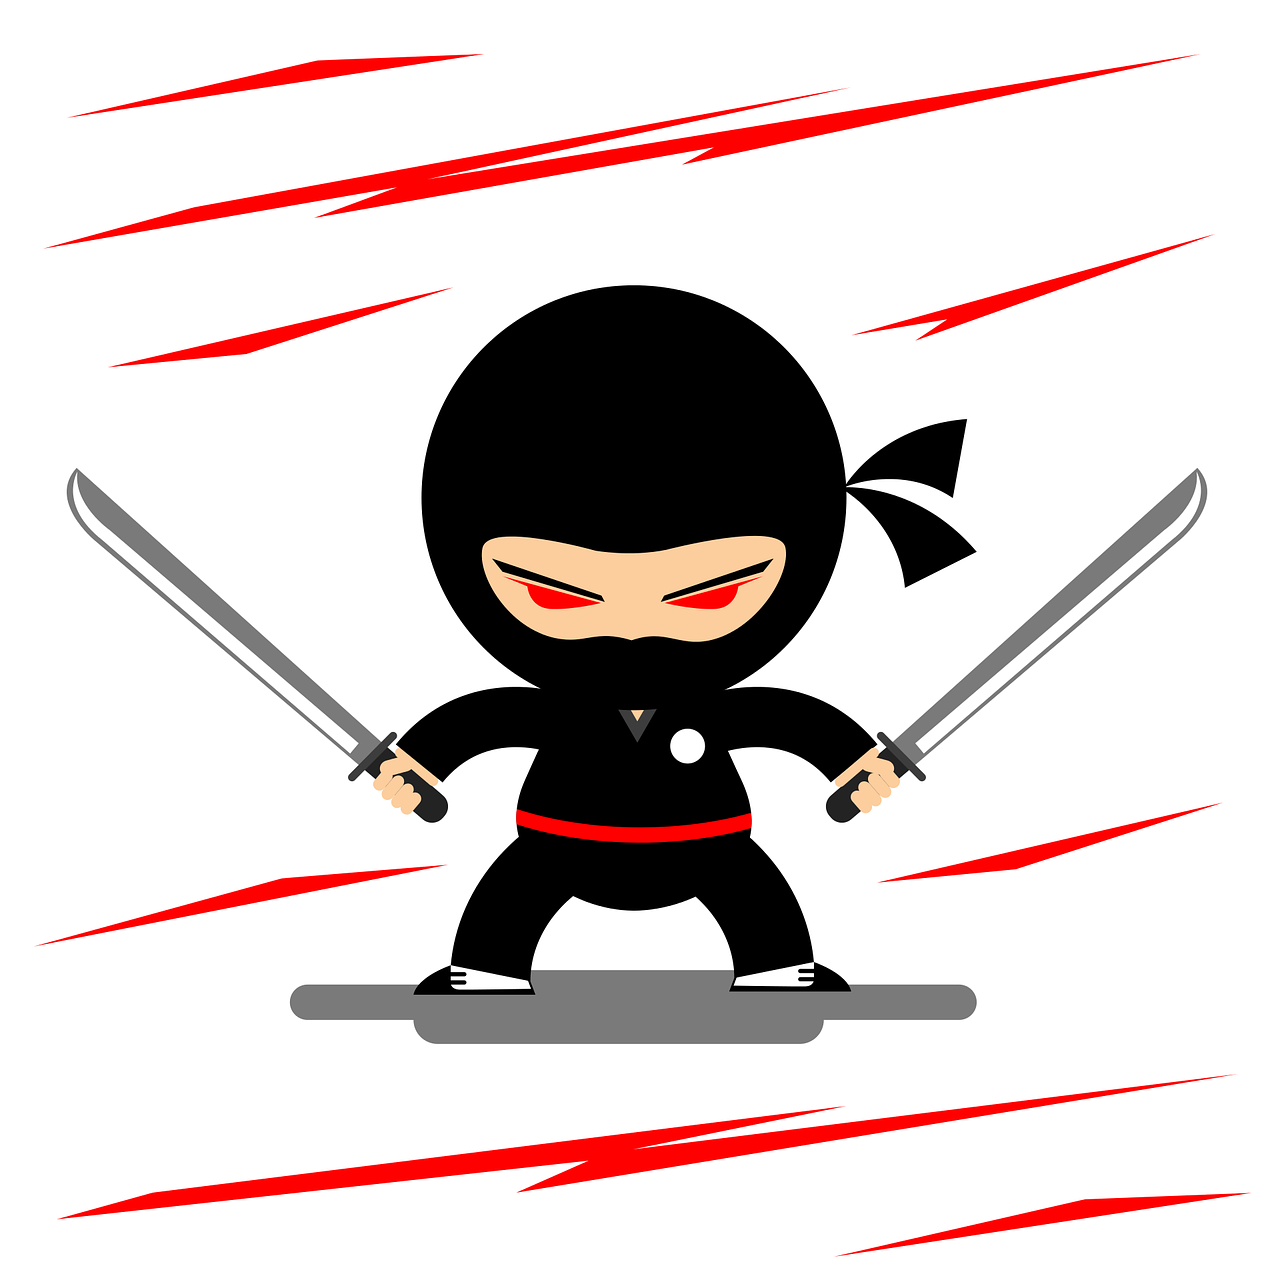 a cartoon ninja with two swords in his hand, an illustration of, fine art, kill la kill illustration, children\'s illustration, cartoon style illustration, white stripes all over its body